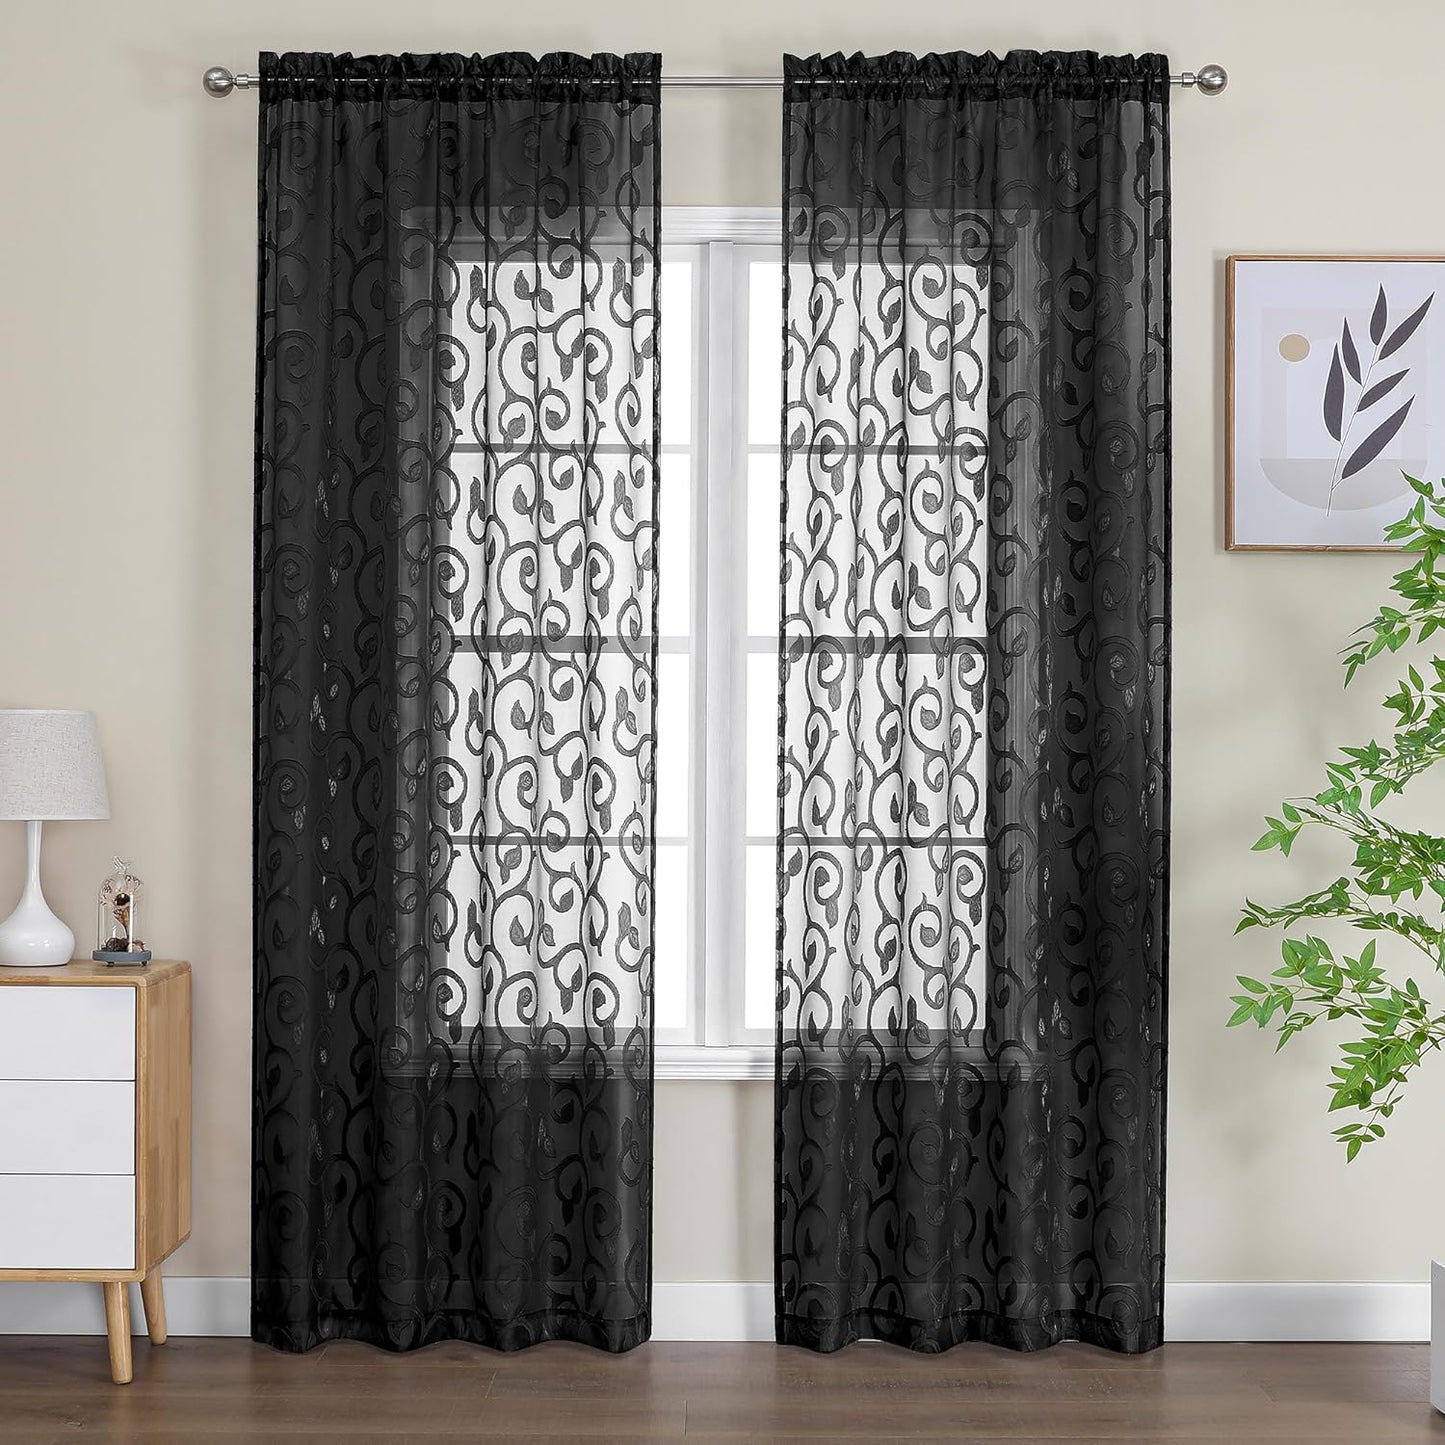 OWENIE Furman Sheer Curtains 84 Inches Long for Bedroom Living Room 2 Panels Set, Light Filtering Window Curtains, Semi Transparent Voile Top Dual Rod Pocket, Grey, 40Wx84L Inch, Total 84 Inches Width  OWENIE Black 40W X 96L 